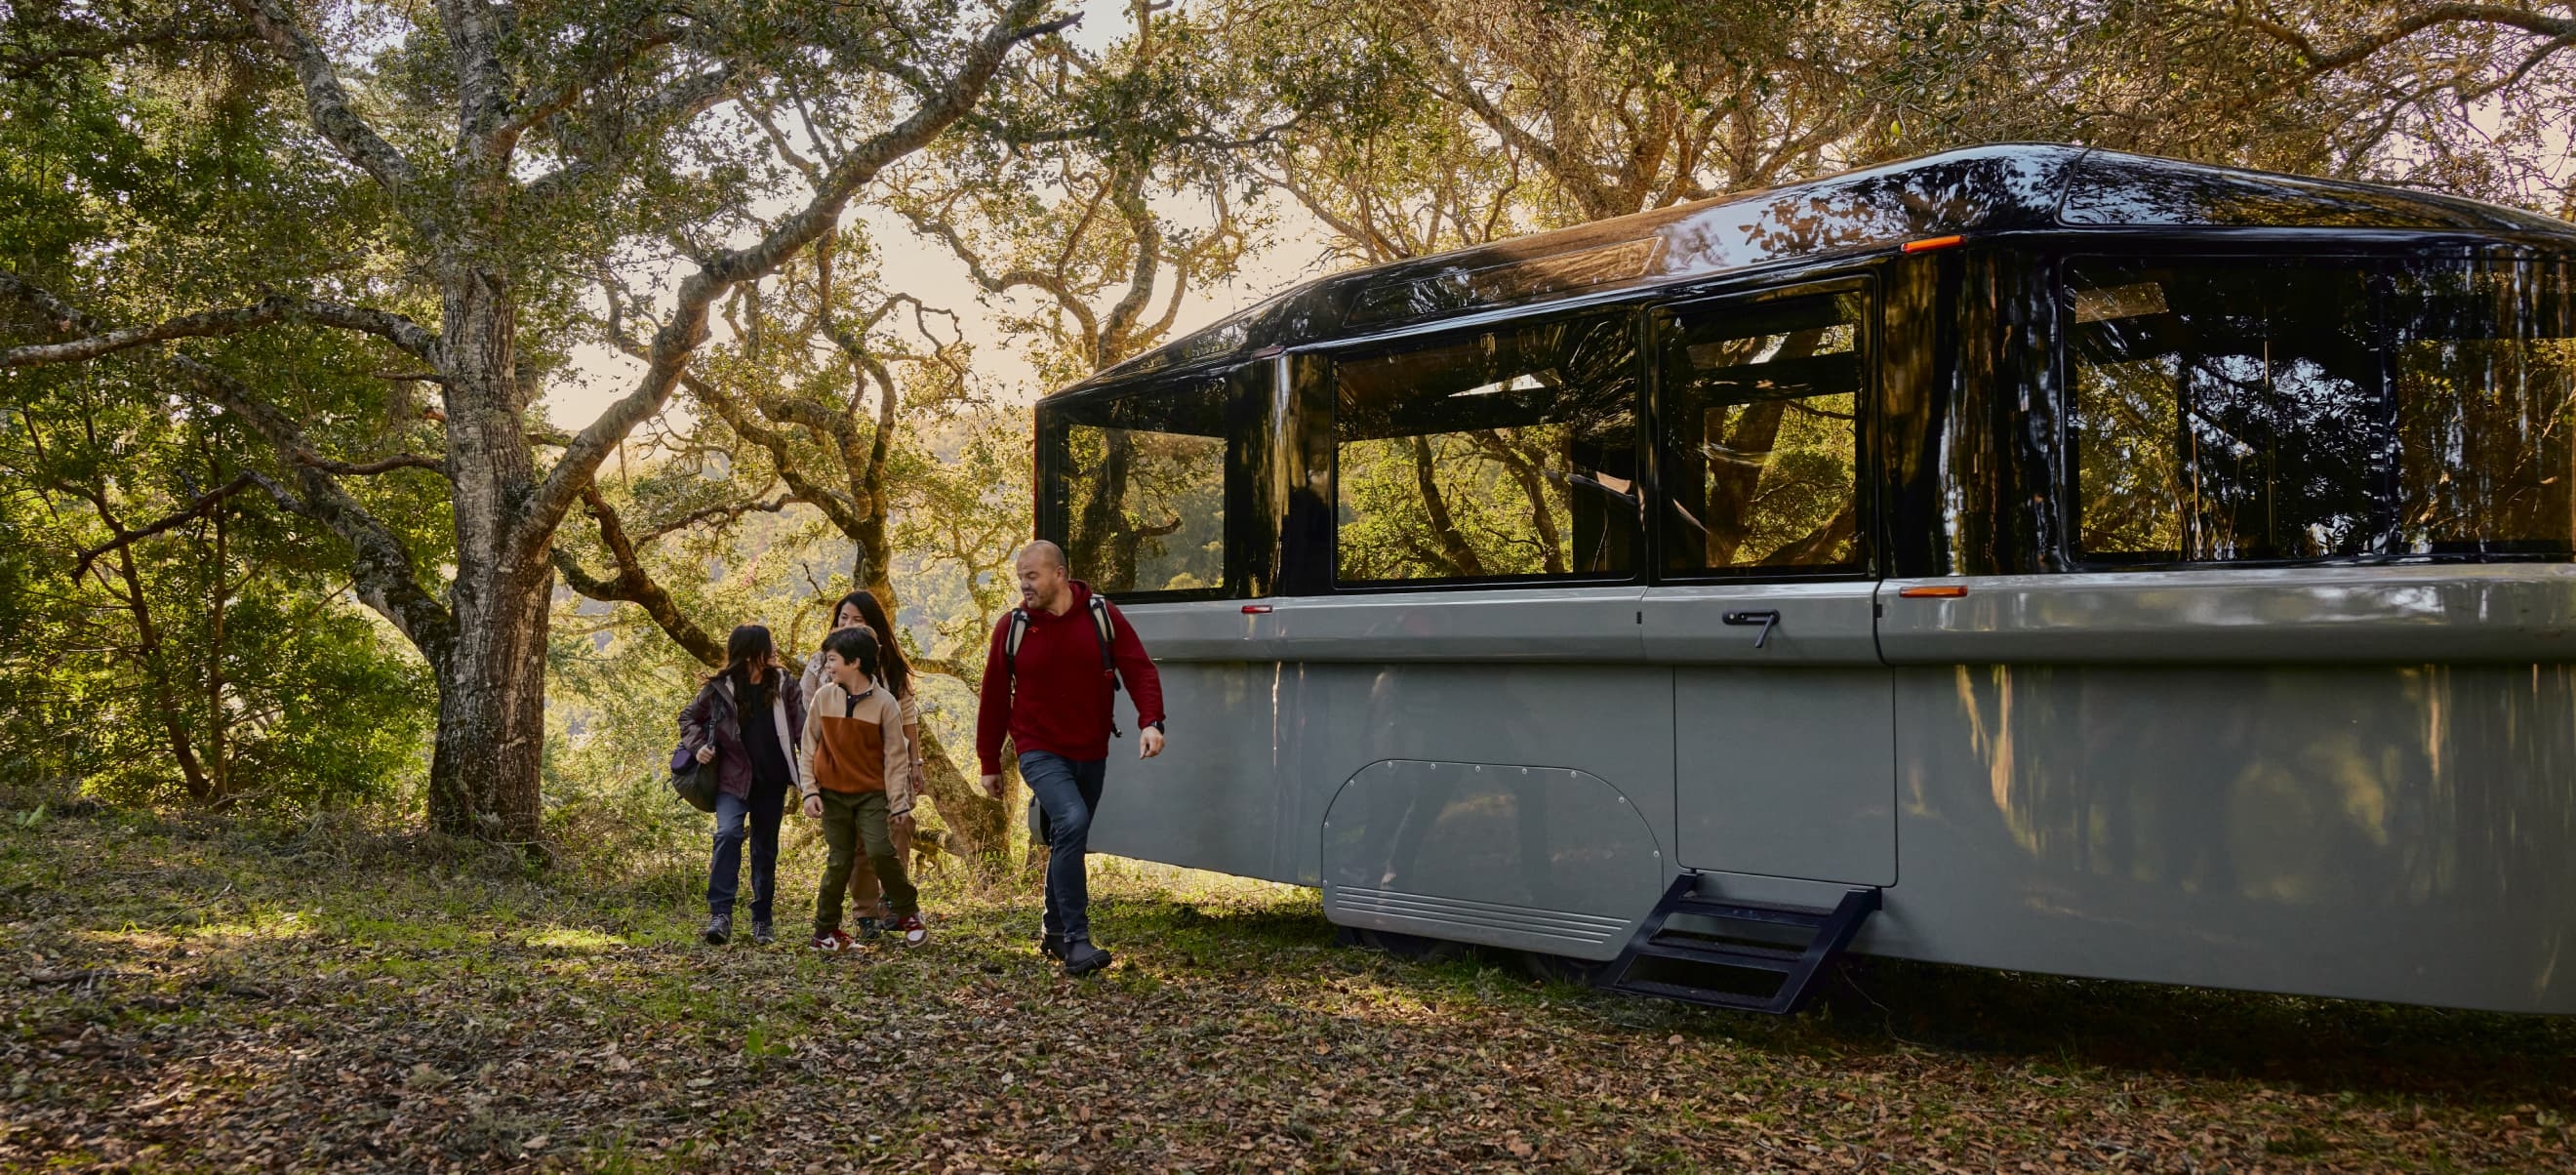 A family exits a modern Lightship RV parked in a wooded area.